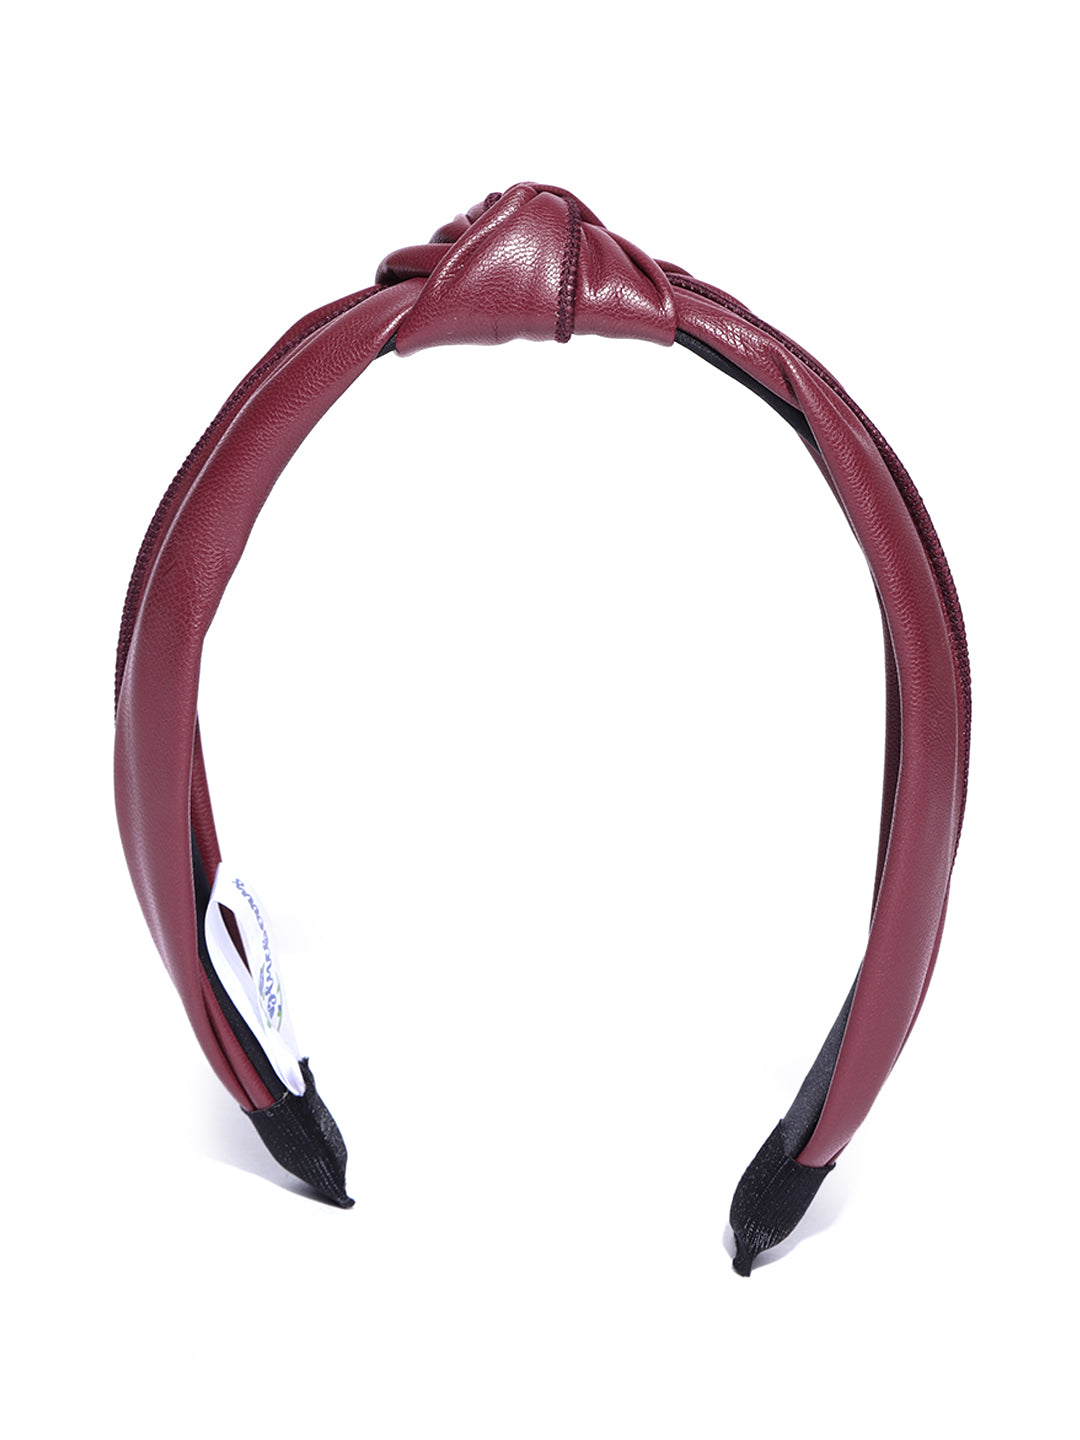 Blueberry red synthetic leather knot hairband